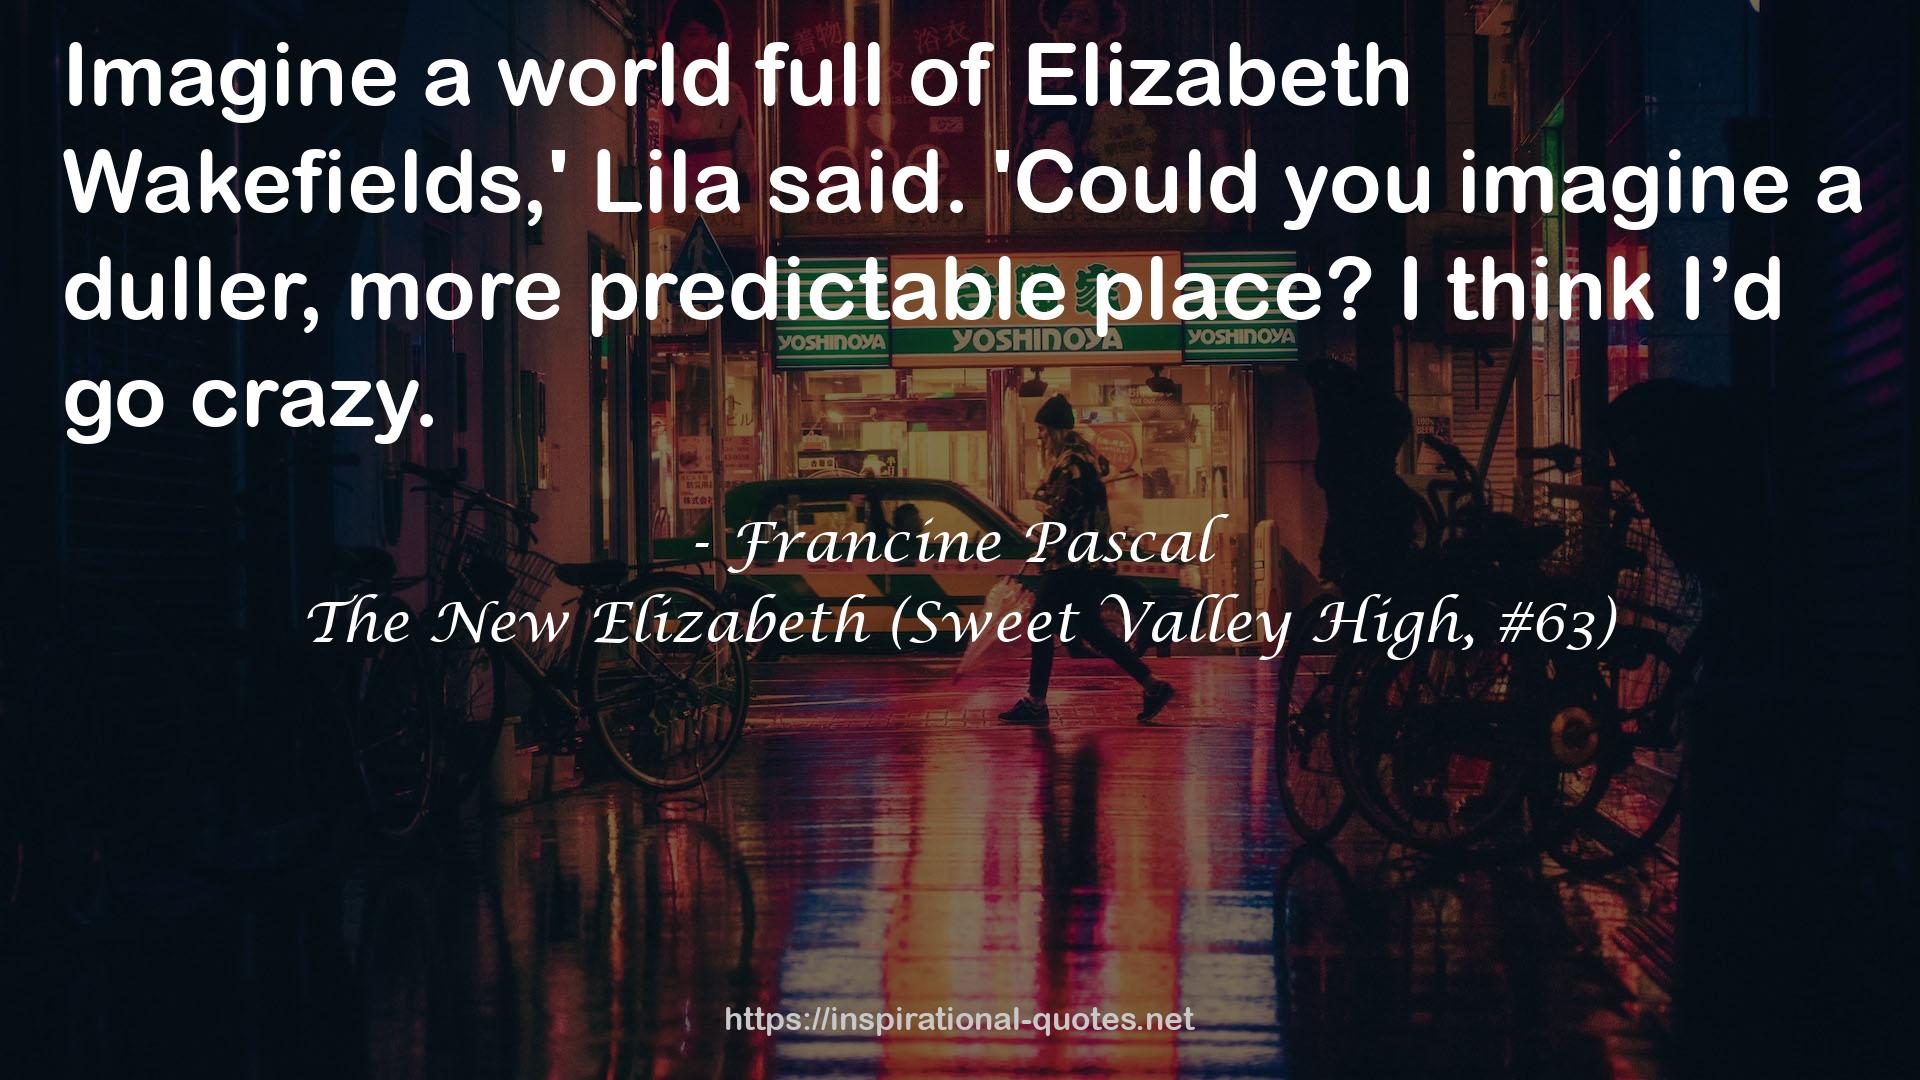 The New Elizabeth (Sweet Valley High, #63) QUOTES